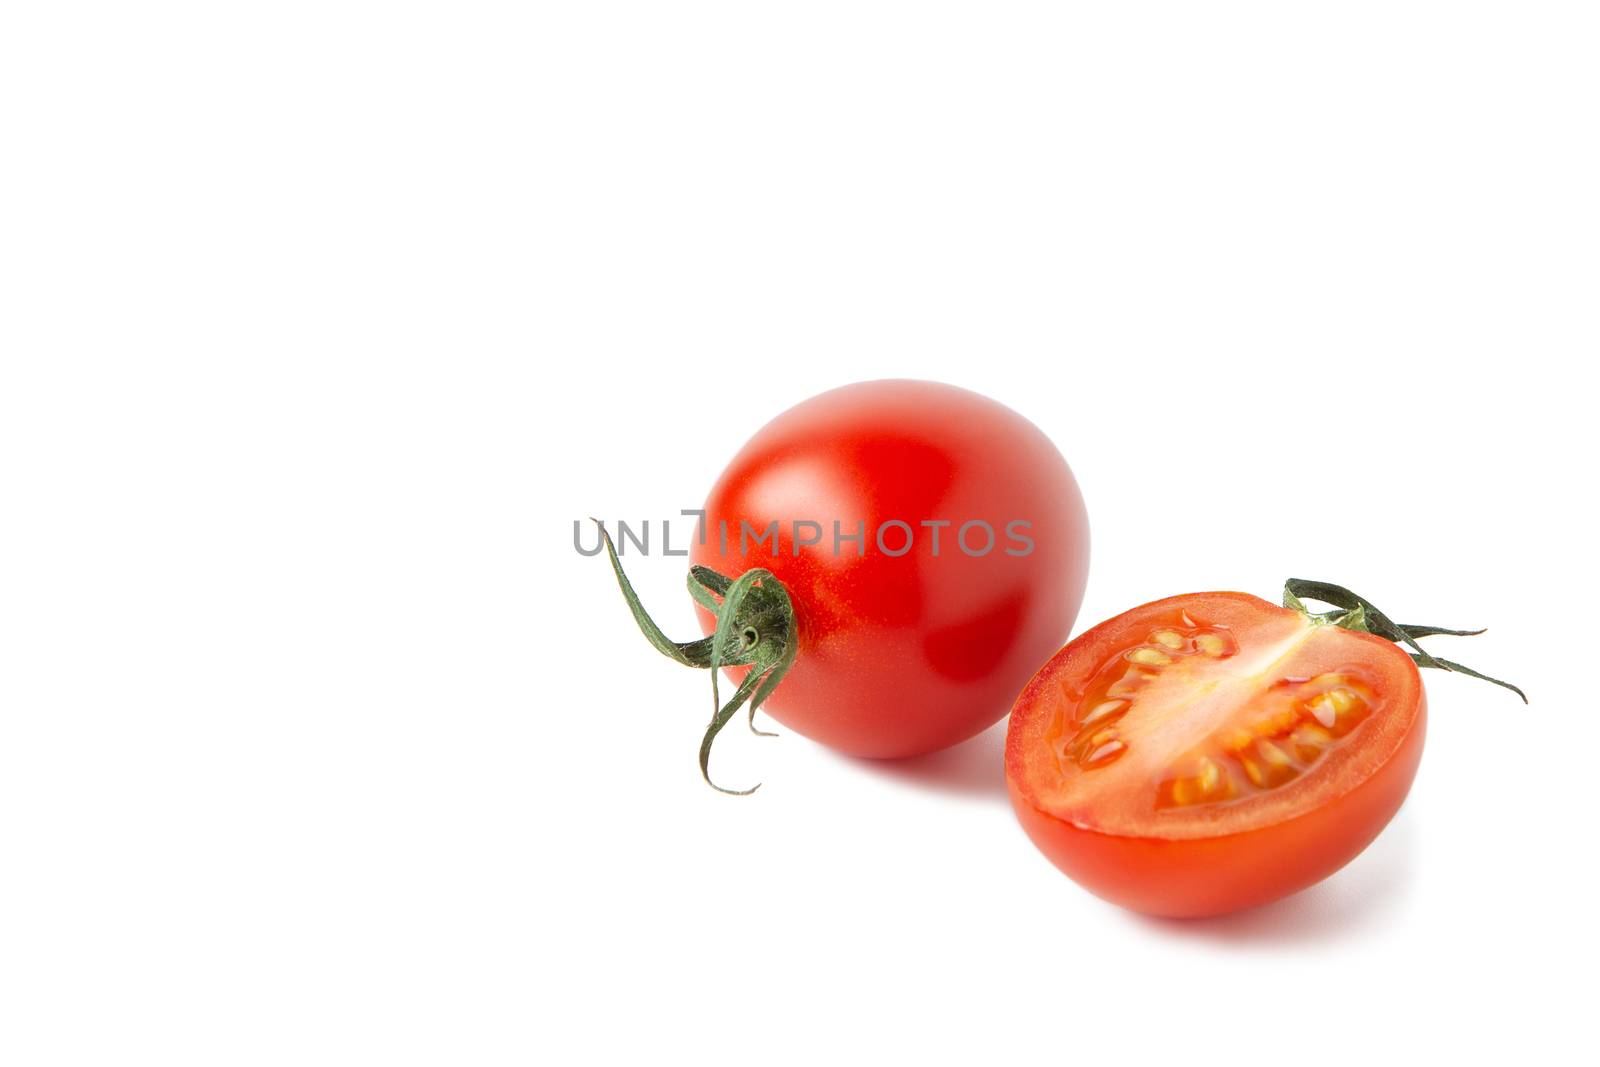 Whole fresh red cherry tomato with leaves, half fetus with small shadow isolated on white background. Macro, flat lay. Horizontal, close-up. Healthy eating, farmer's product, raw food, keto diet.